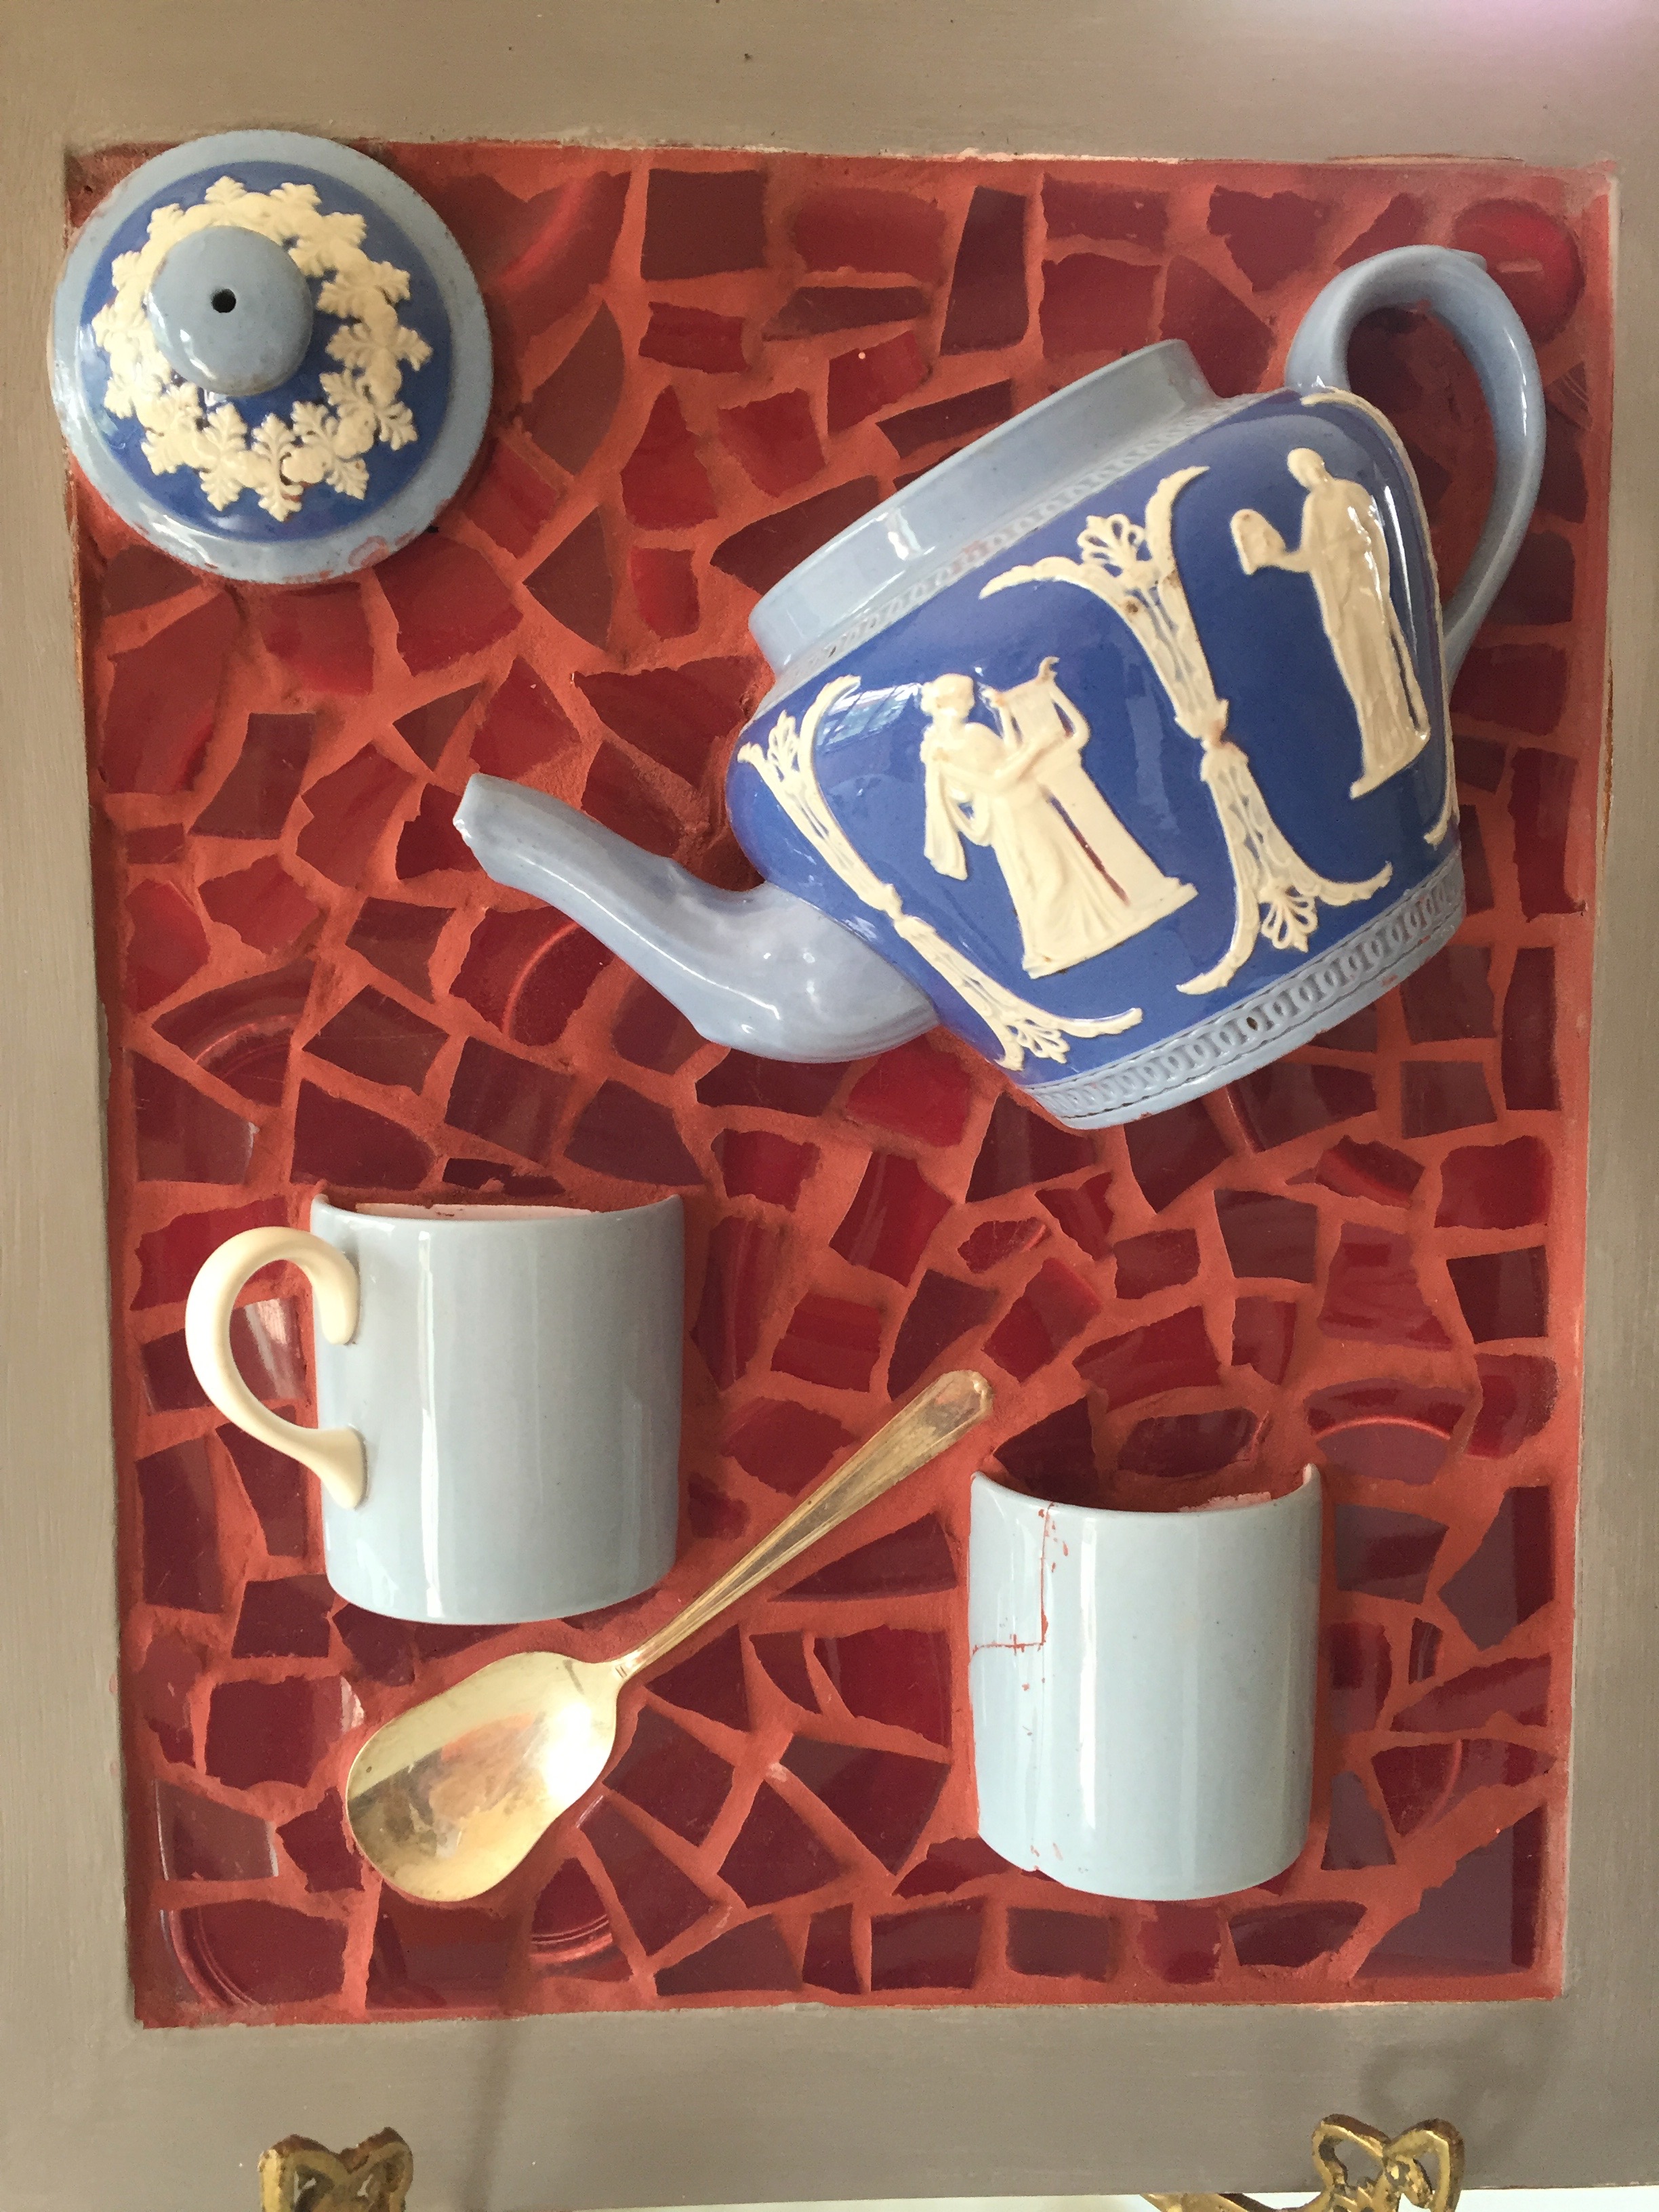 Blue/white teapot, wedgwood cup